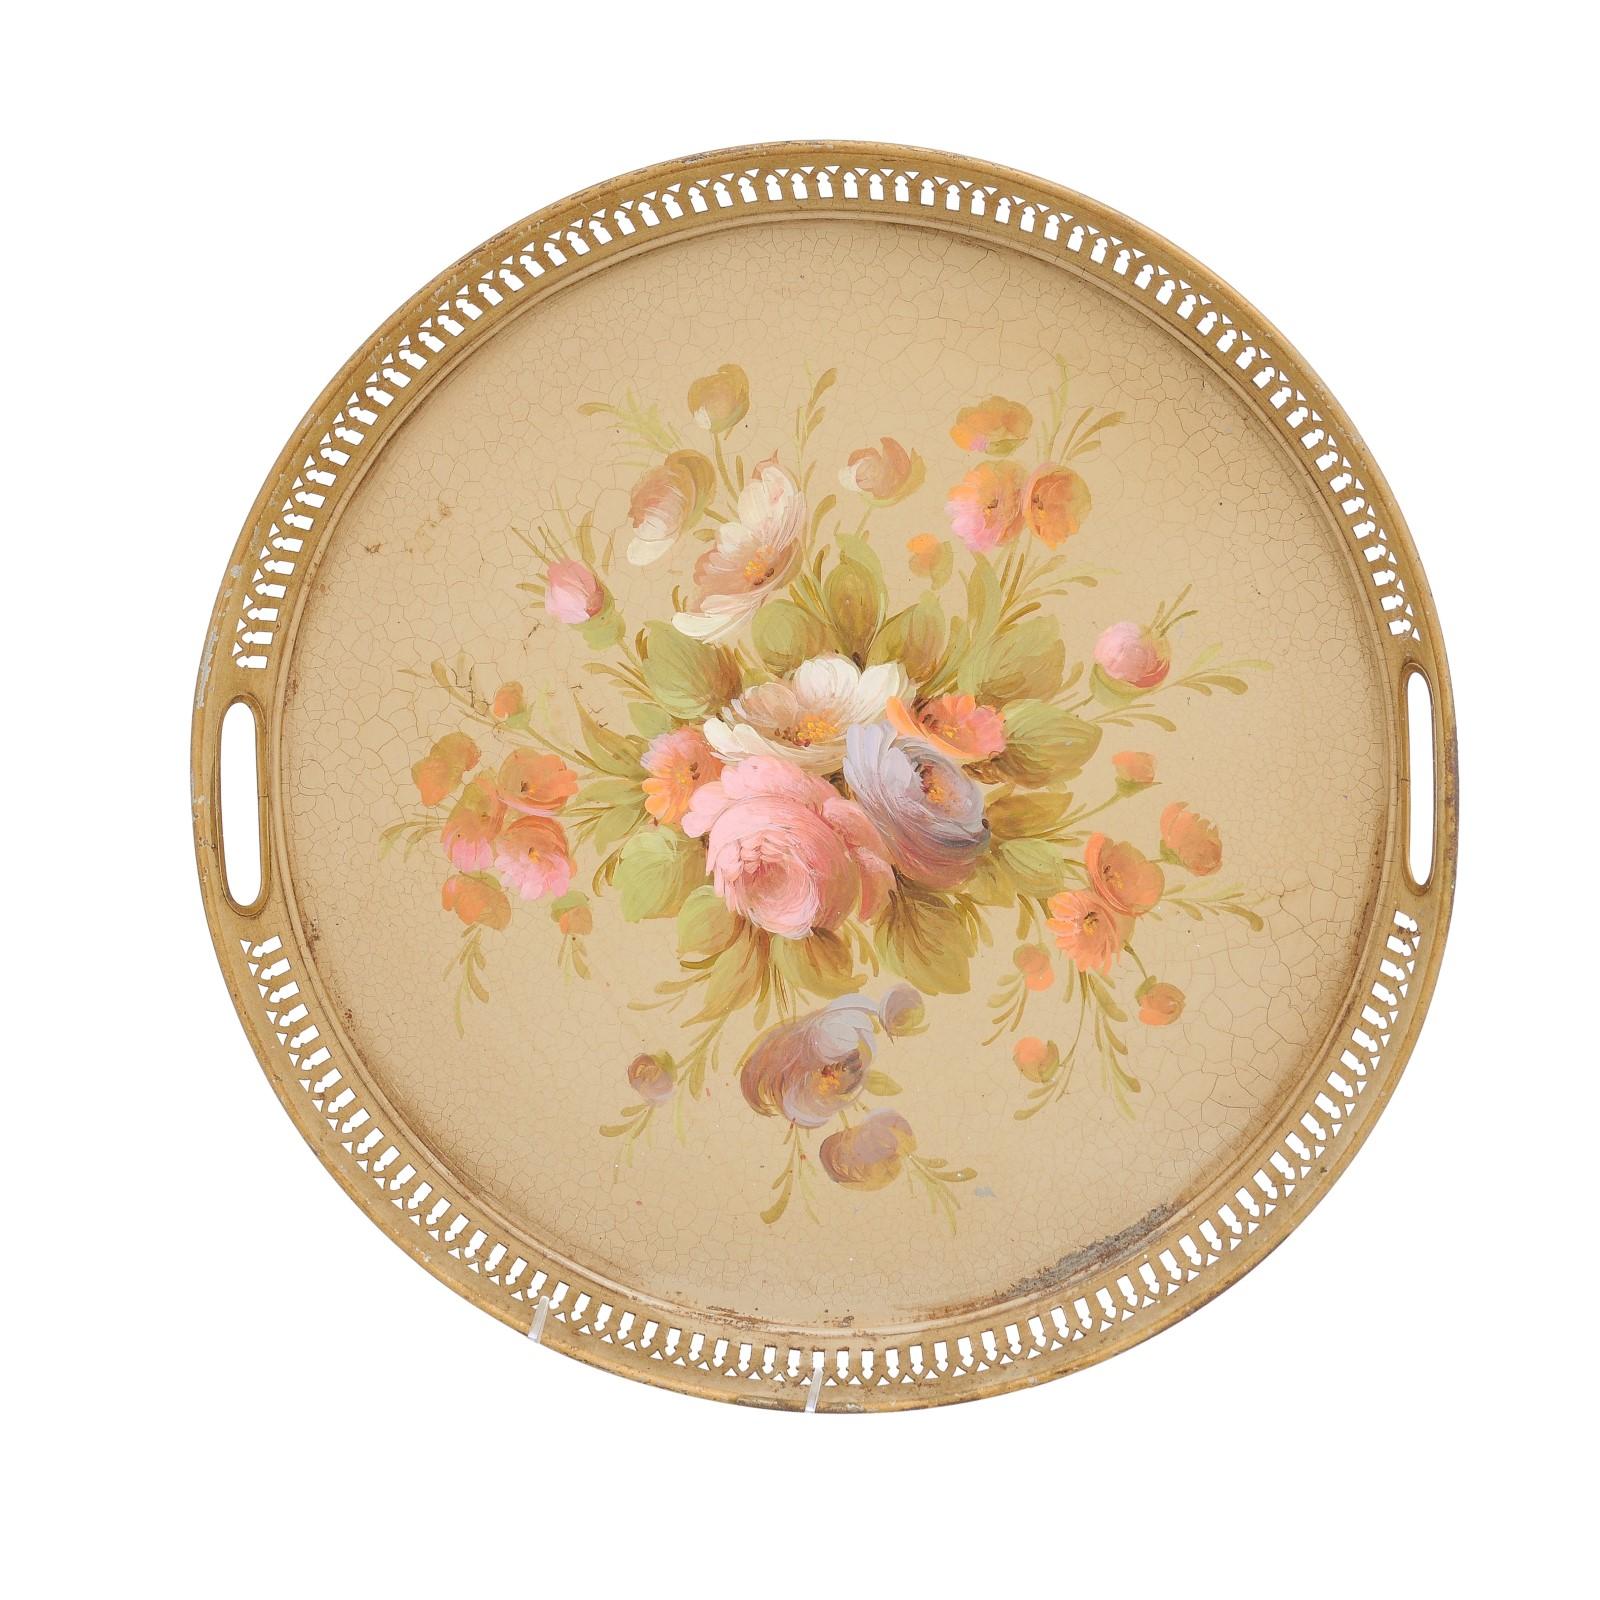 A French round tôle tray from the 20th century with hand-painted décor depicting a bouquet of roses, and pierced gallery. Created in France during the 20th century, this tôle tray features a circular shape surrounded by a pierced gallery adorned